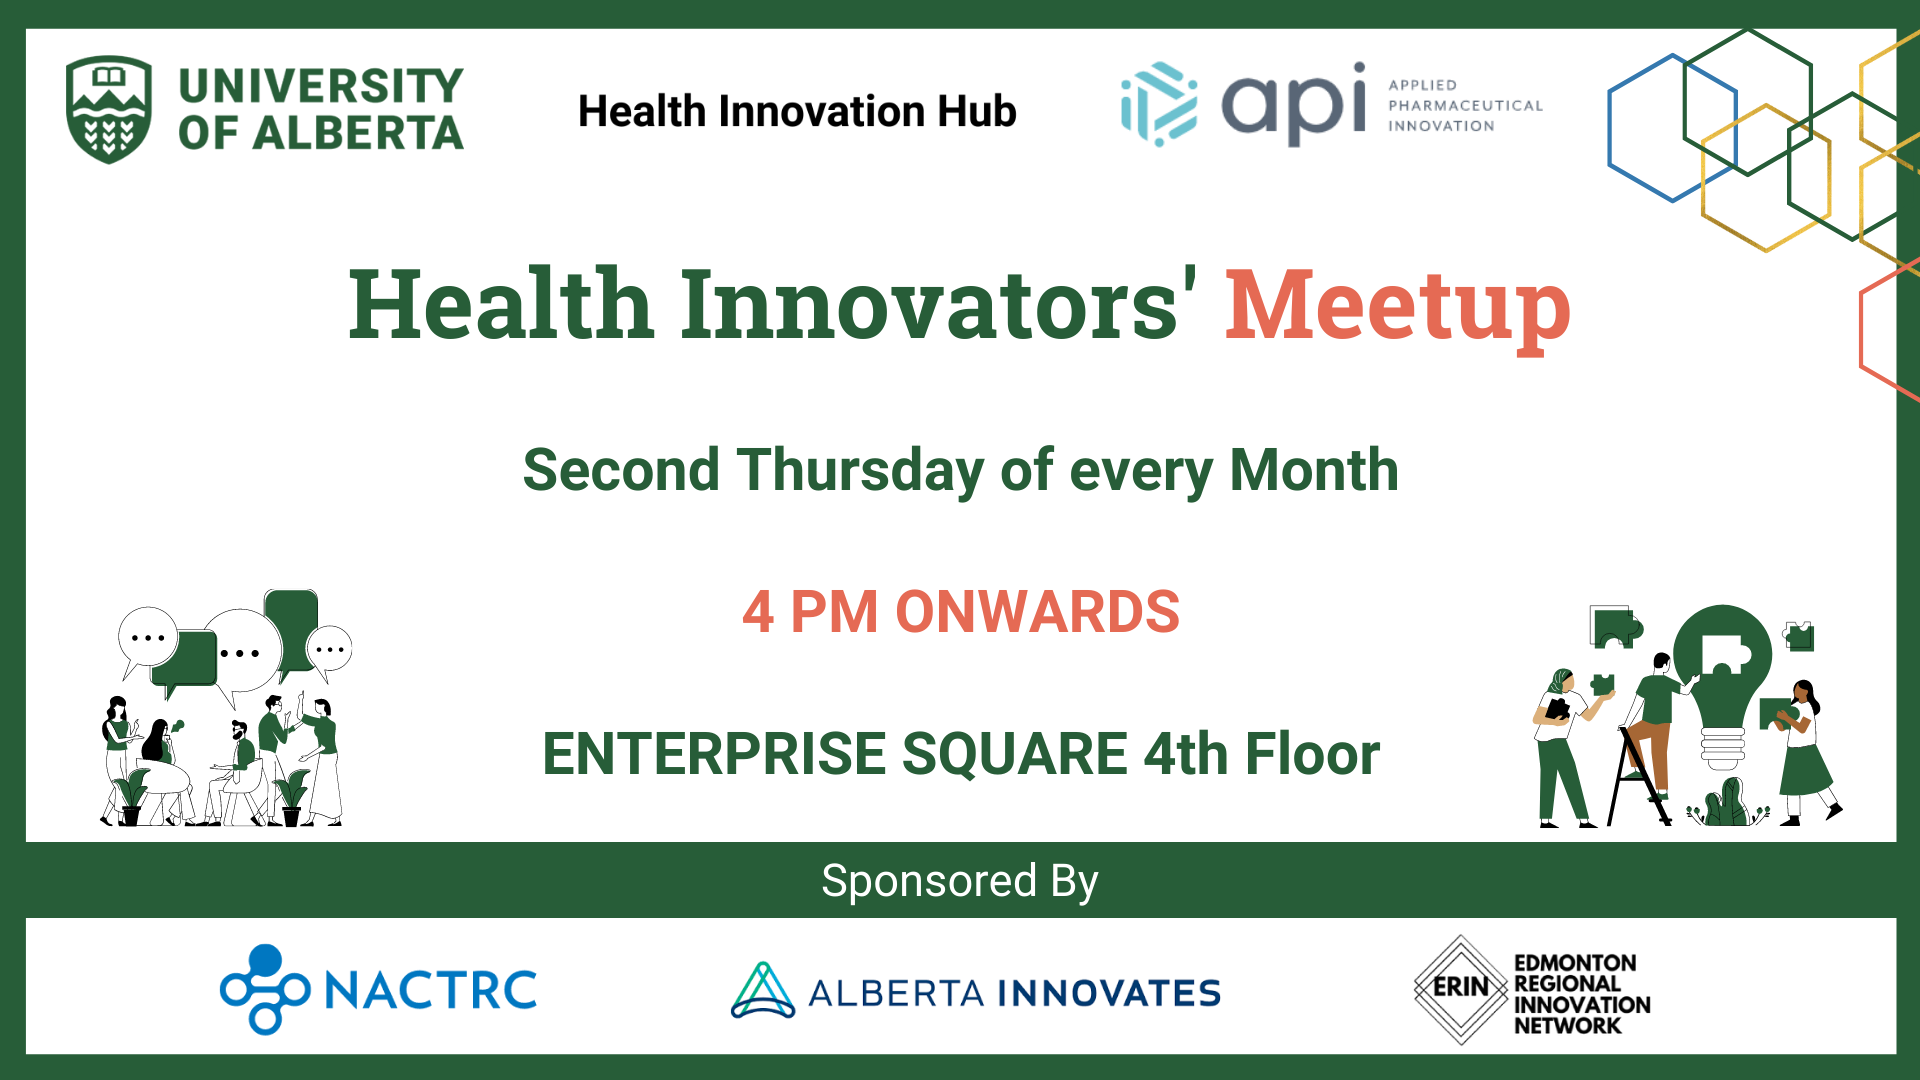 Health Innovators' Meetup, second Thursday of every month, 4pm onwards, Enterprise Square 4th floor